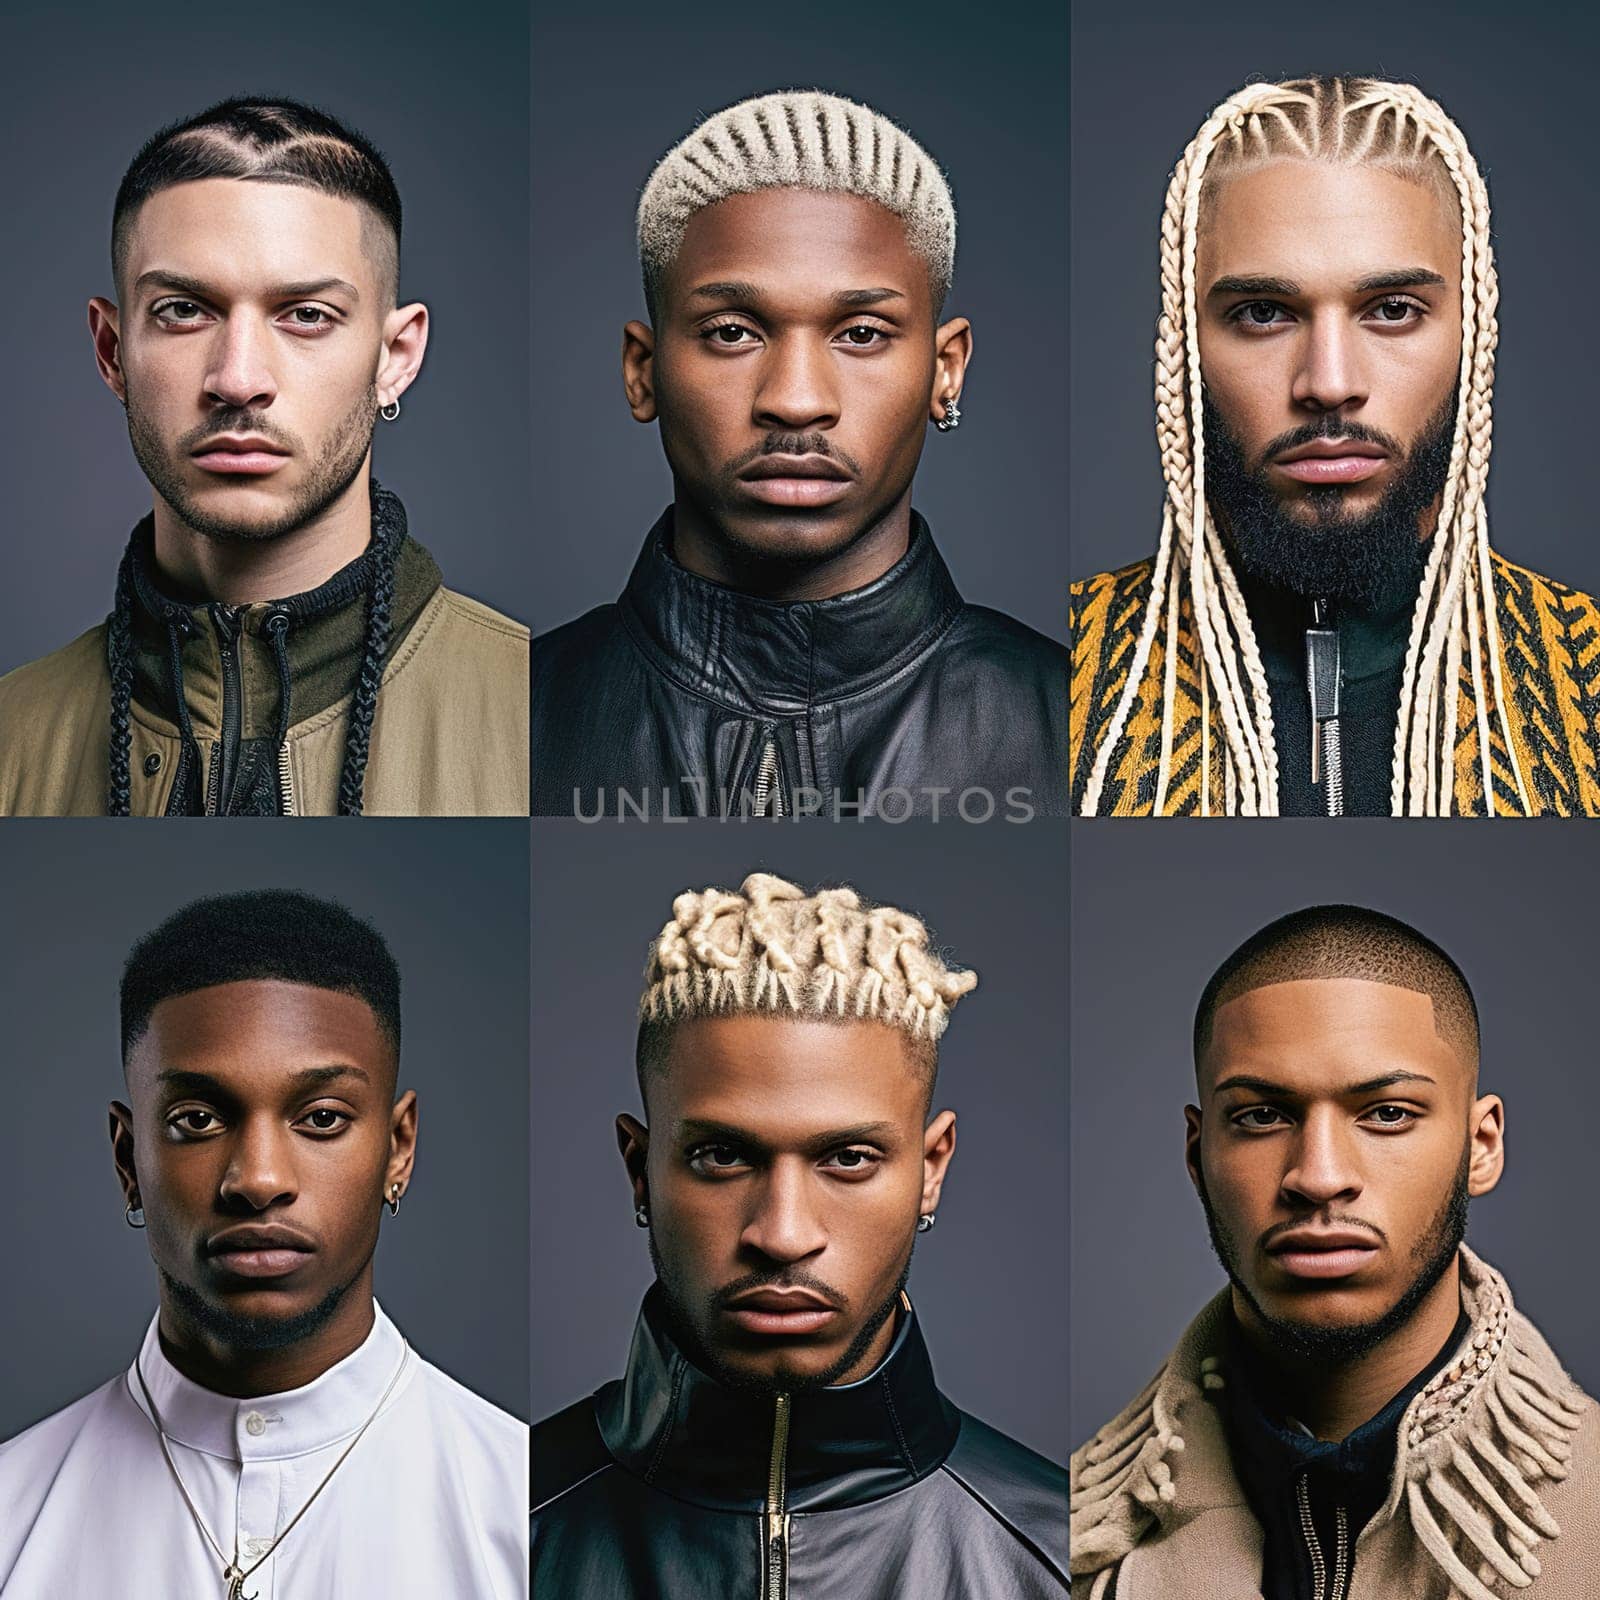 Stylish dreadlock hairstyles from the African American men's catalog. by Yurich32